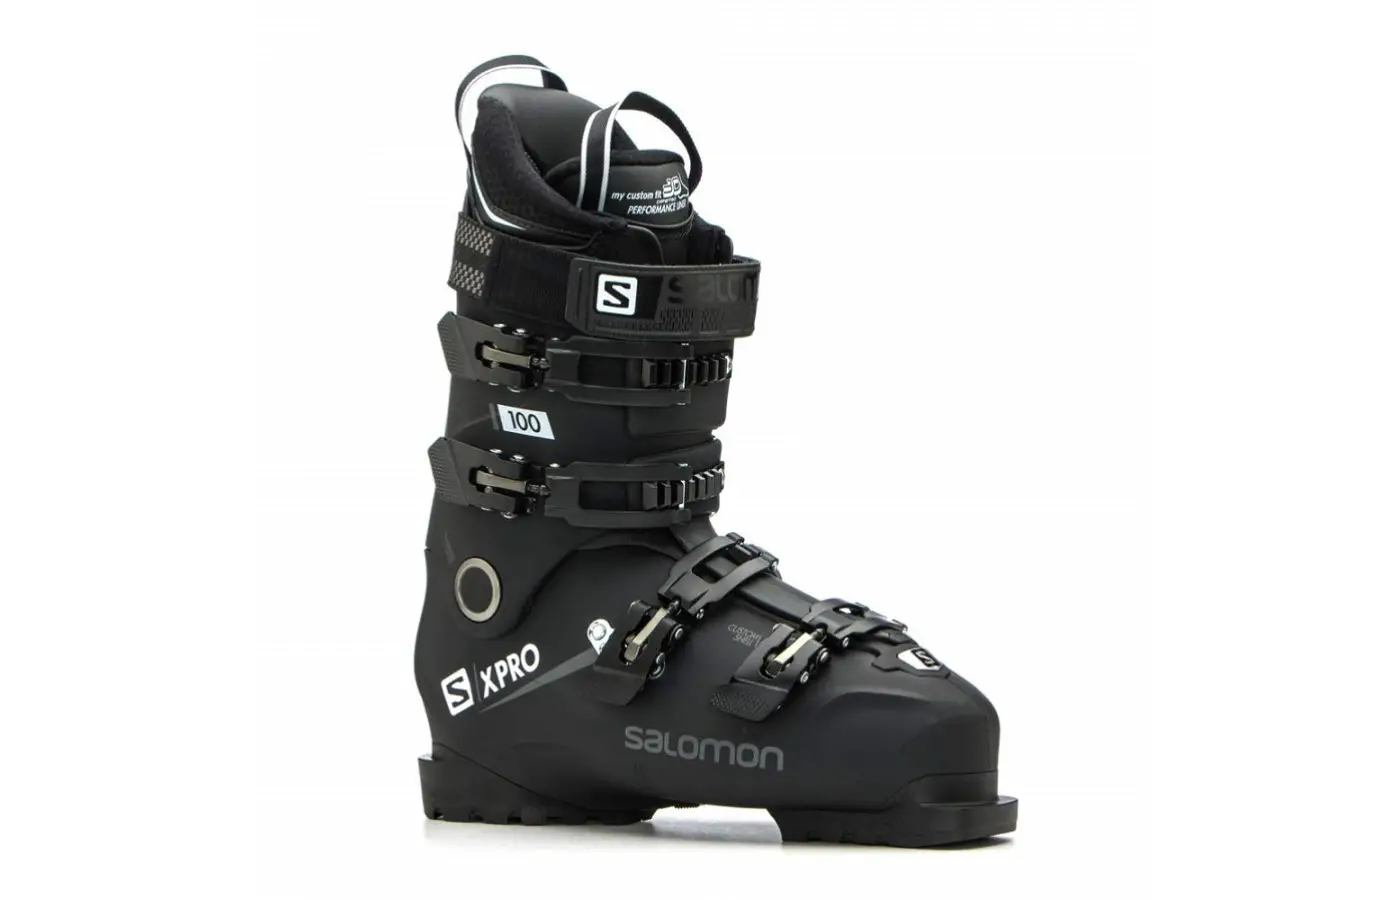 The Salomon X Pro 100 offers a rigid lower shell for better power transmission.